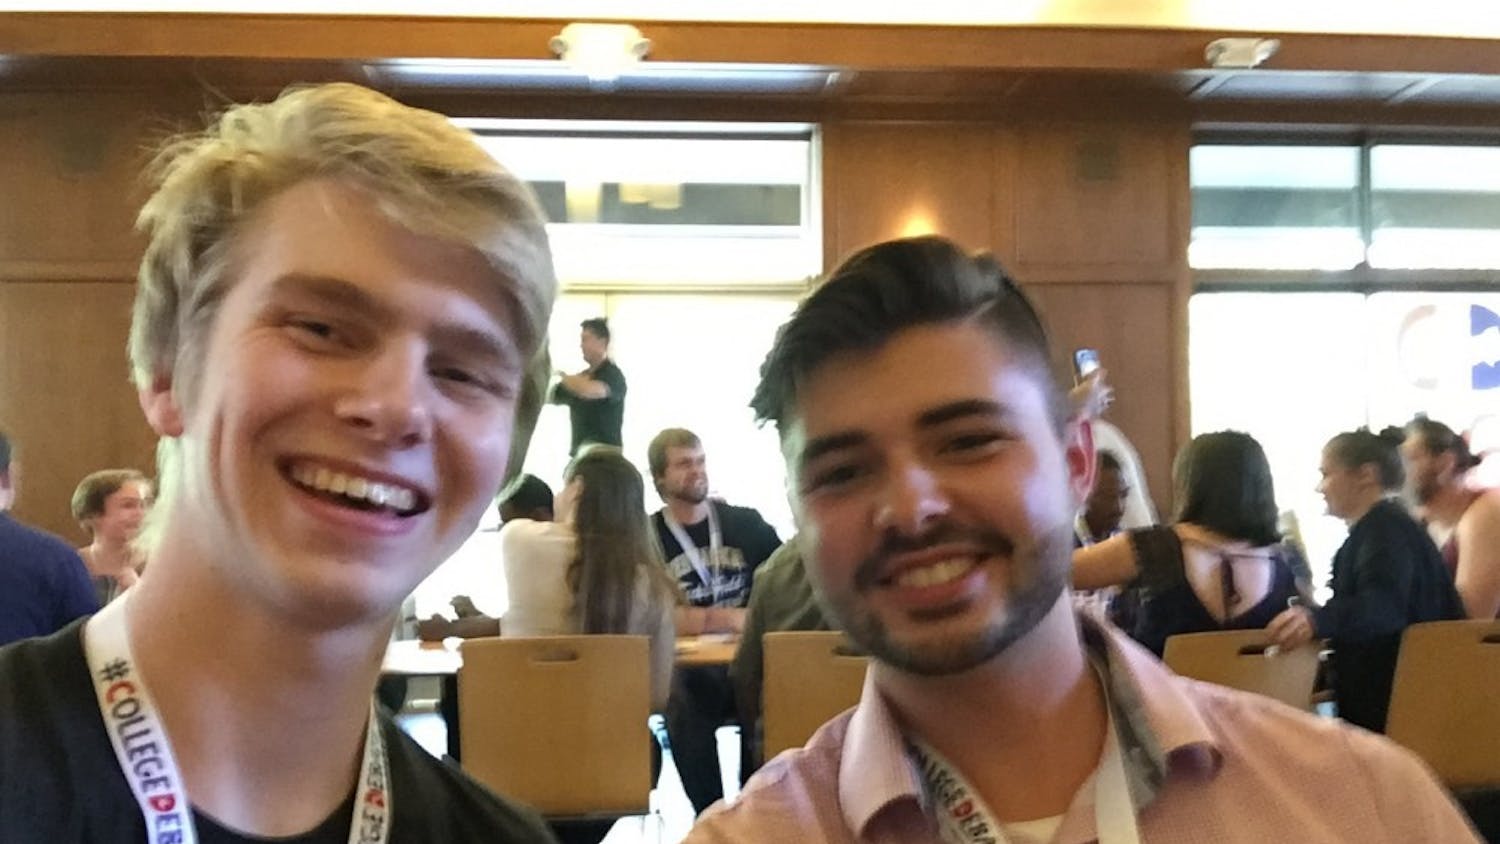 Berk Ehrmantraut, left, and a fellow participant at this year's College Debate 2016.